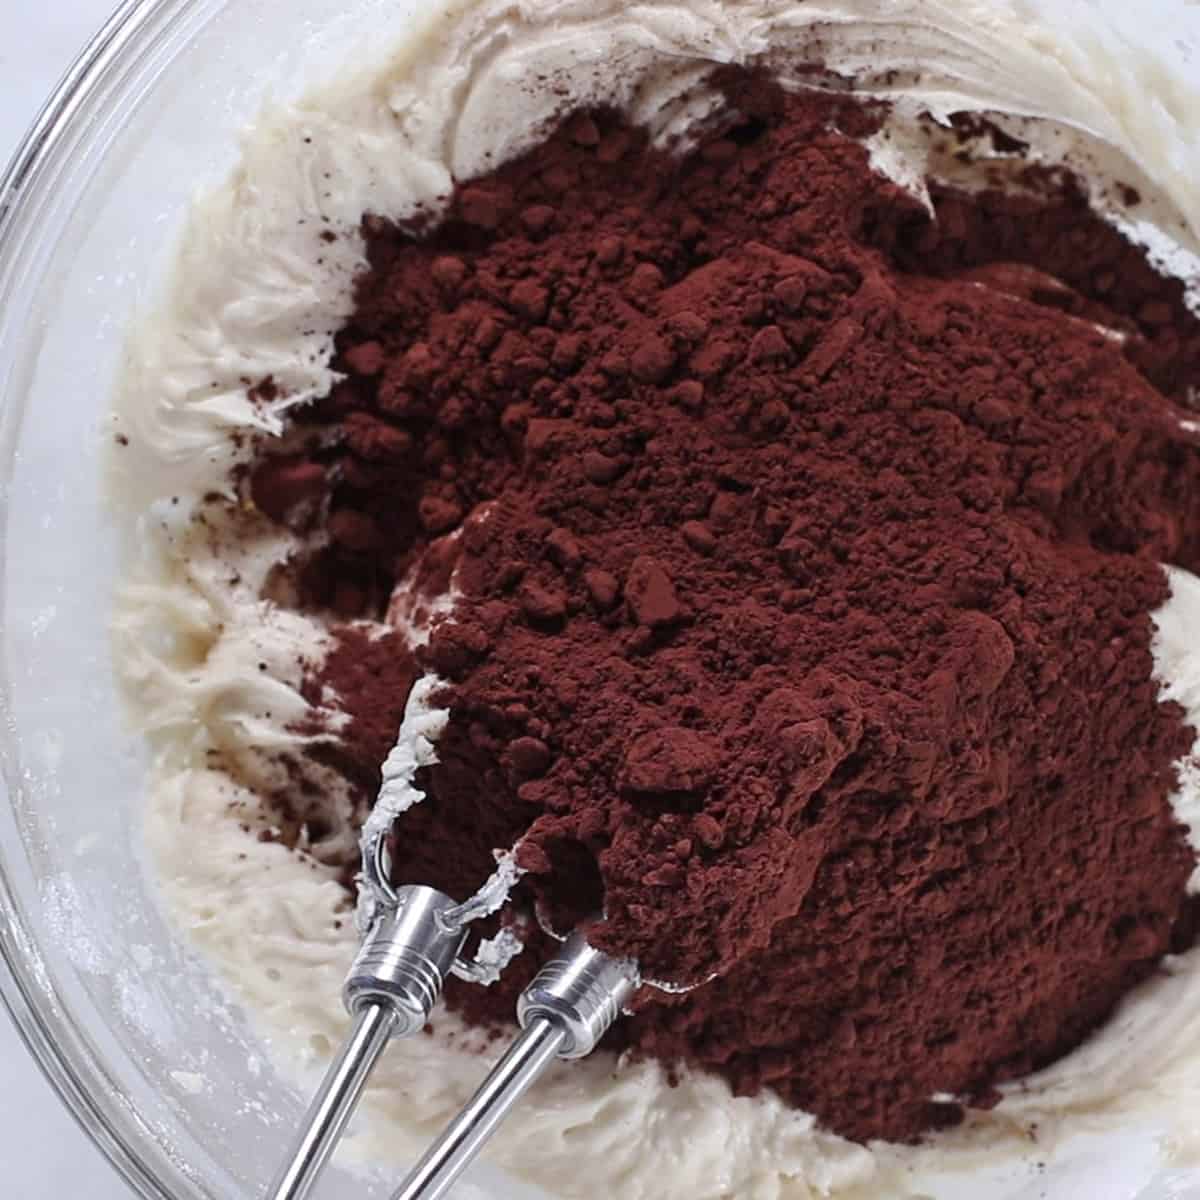 cocoa in with frosting to make fudge frosting.